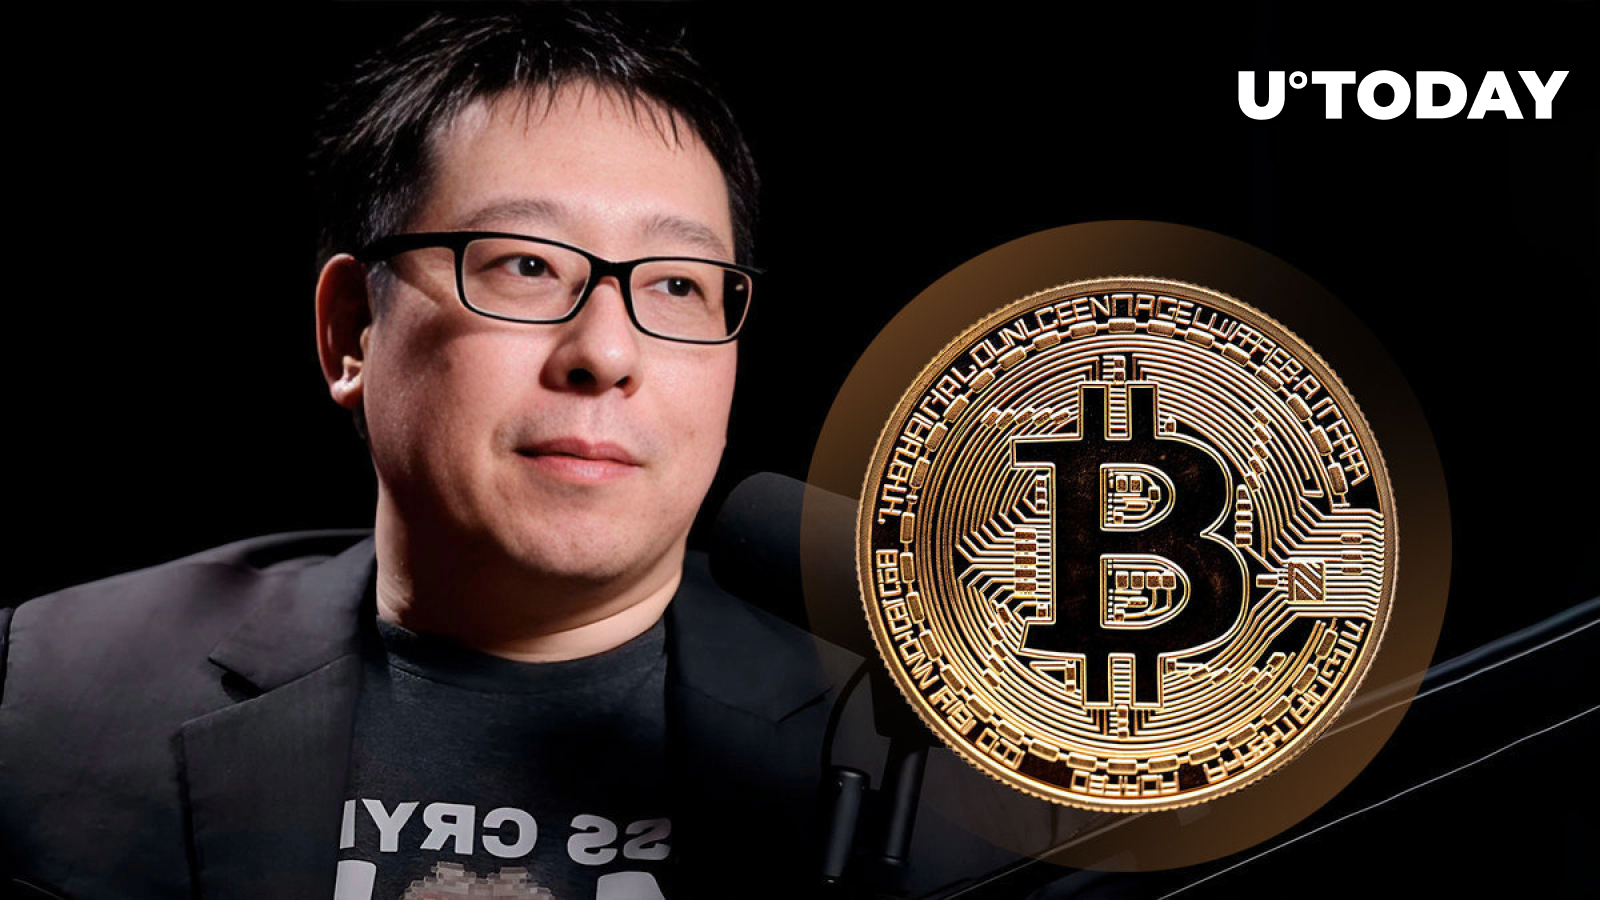 Crucial Bitcoin (BTC) Warning Issued by Samson Mow